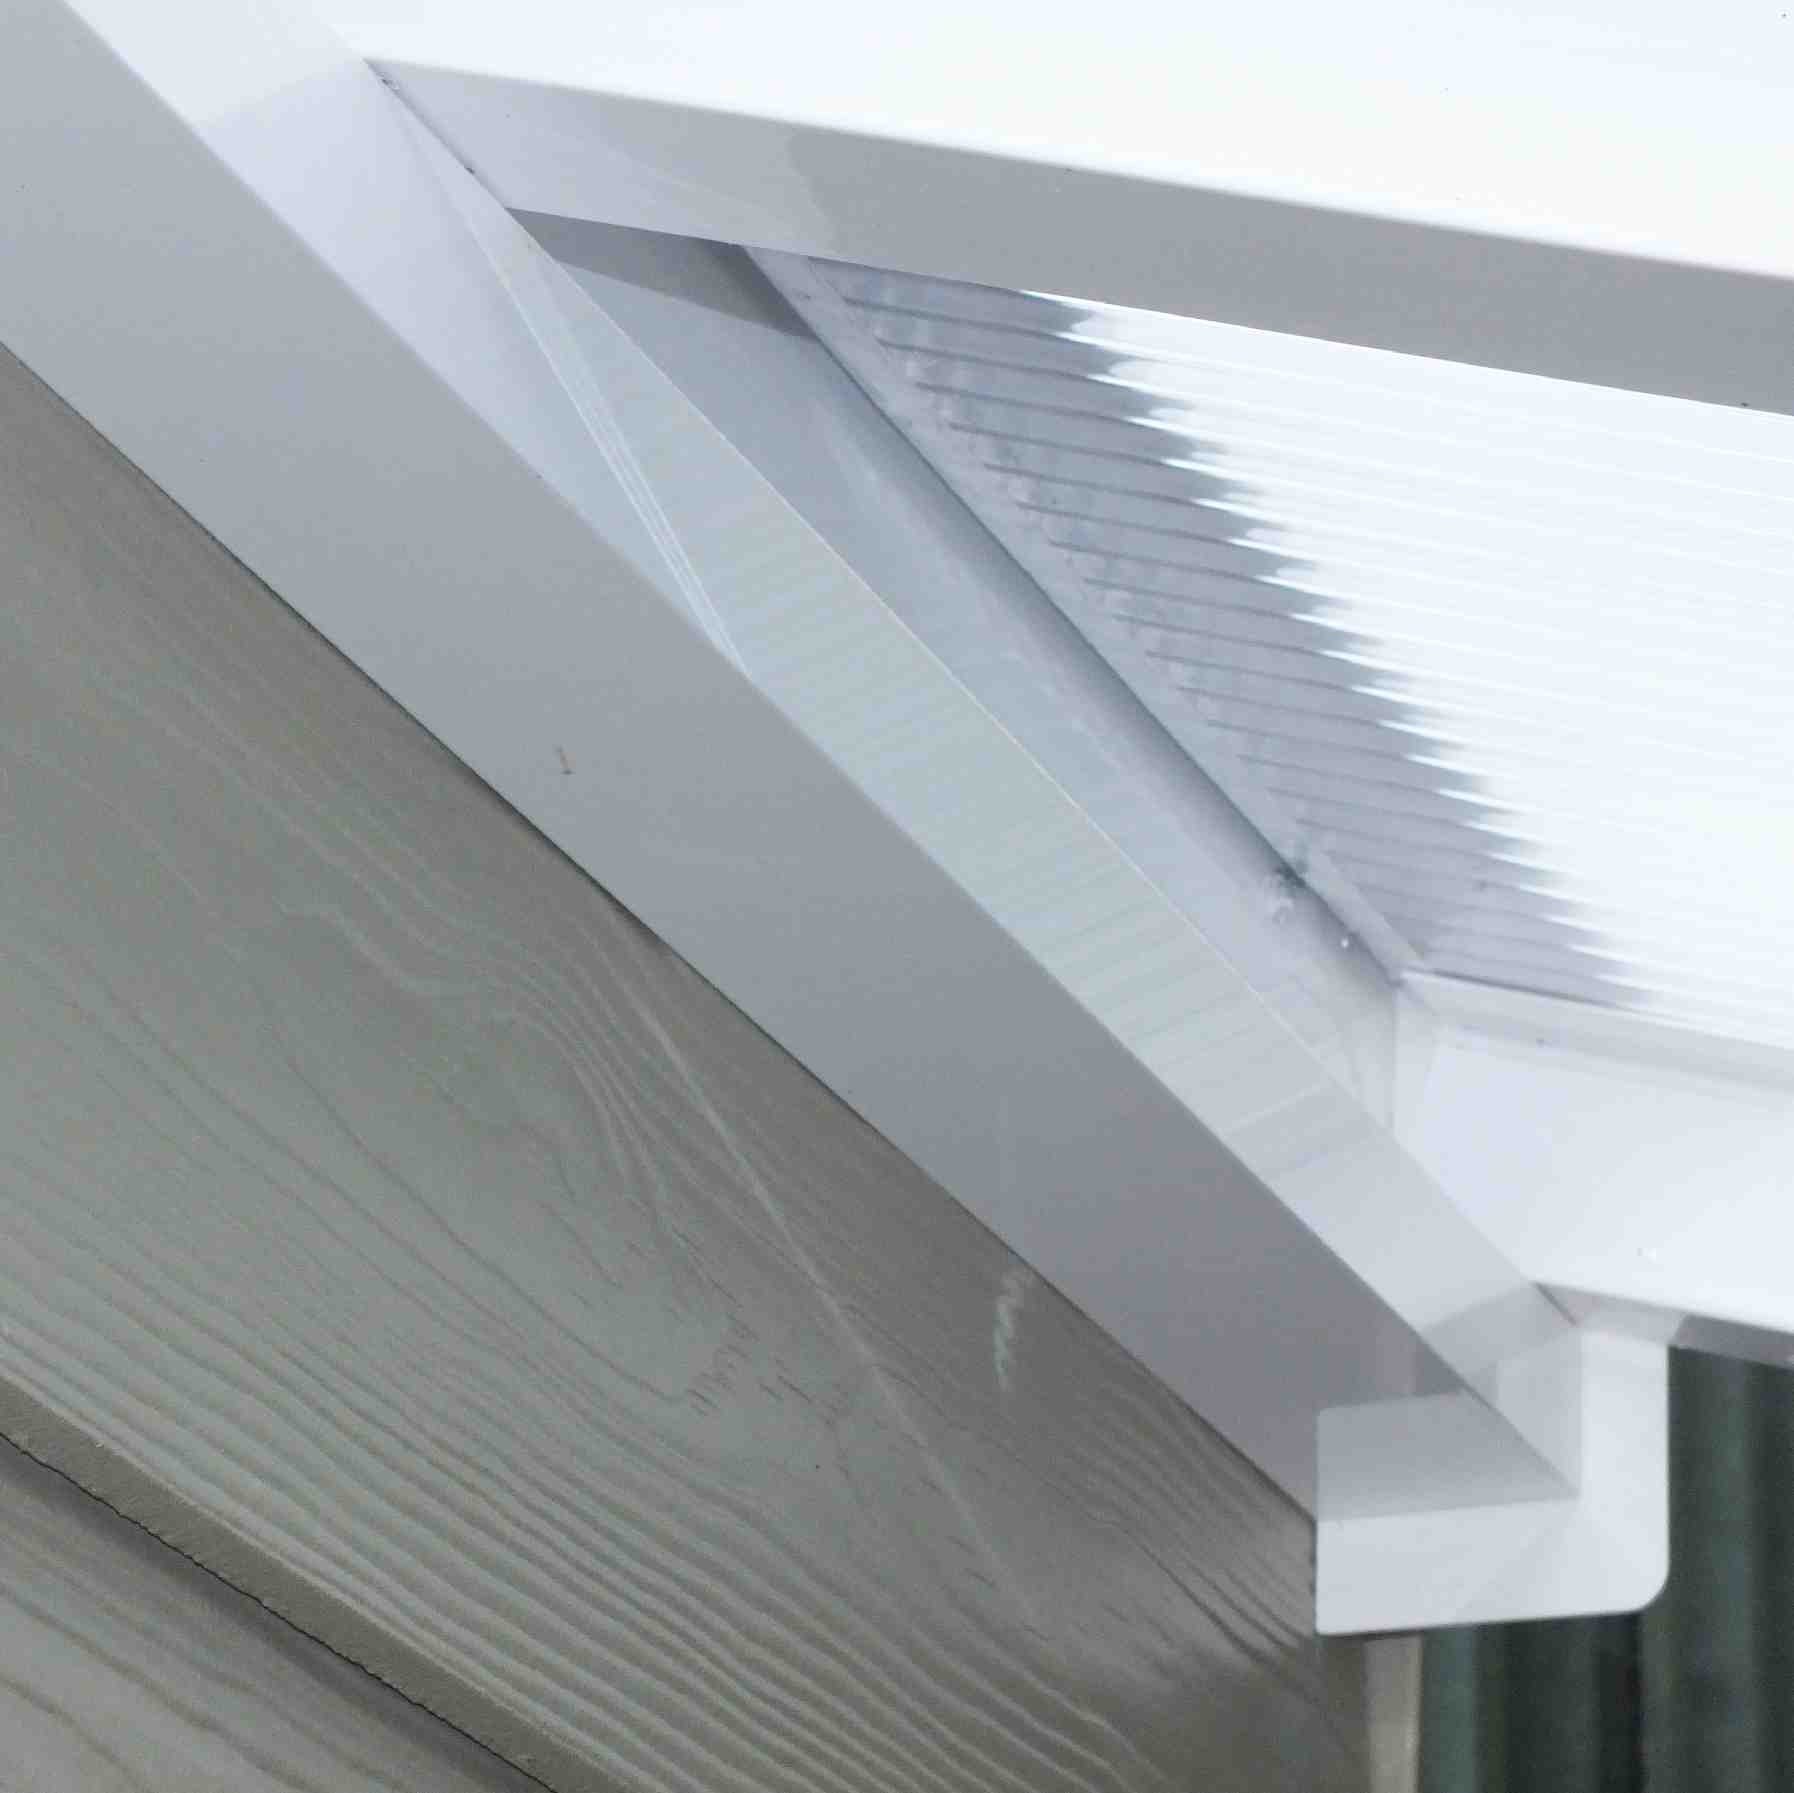 Great deals on Omega Verandah White with 6mm Glass Clear Plate Polycarbonate Glazing - 7.0m (W) x 3.0m (P), (4) Supporting Posts